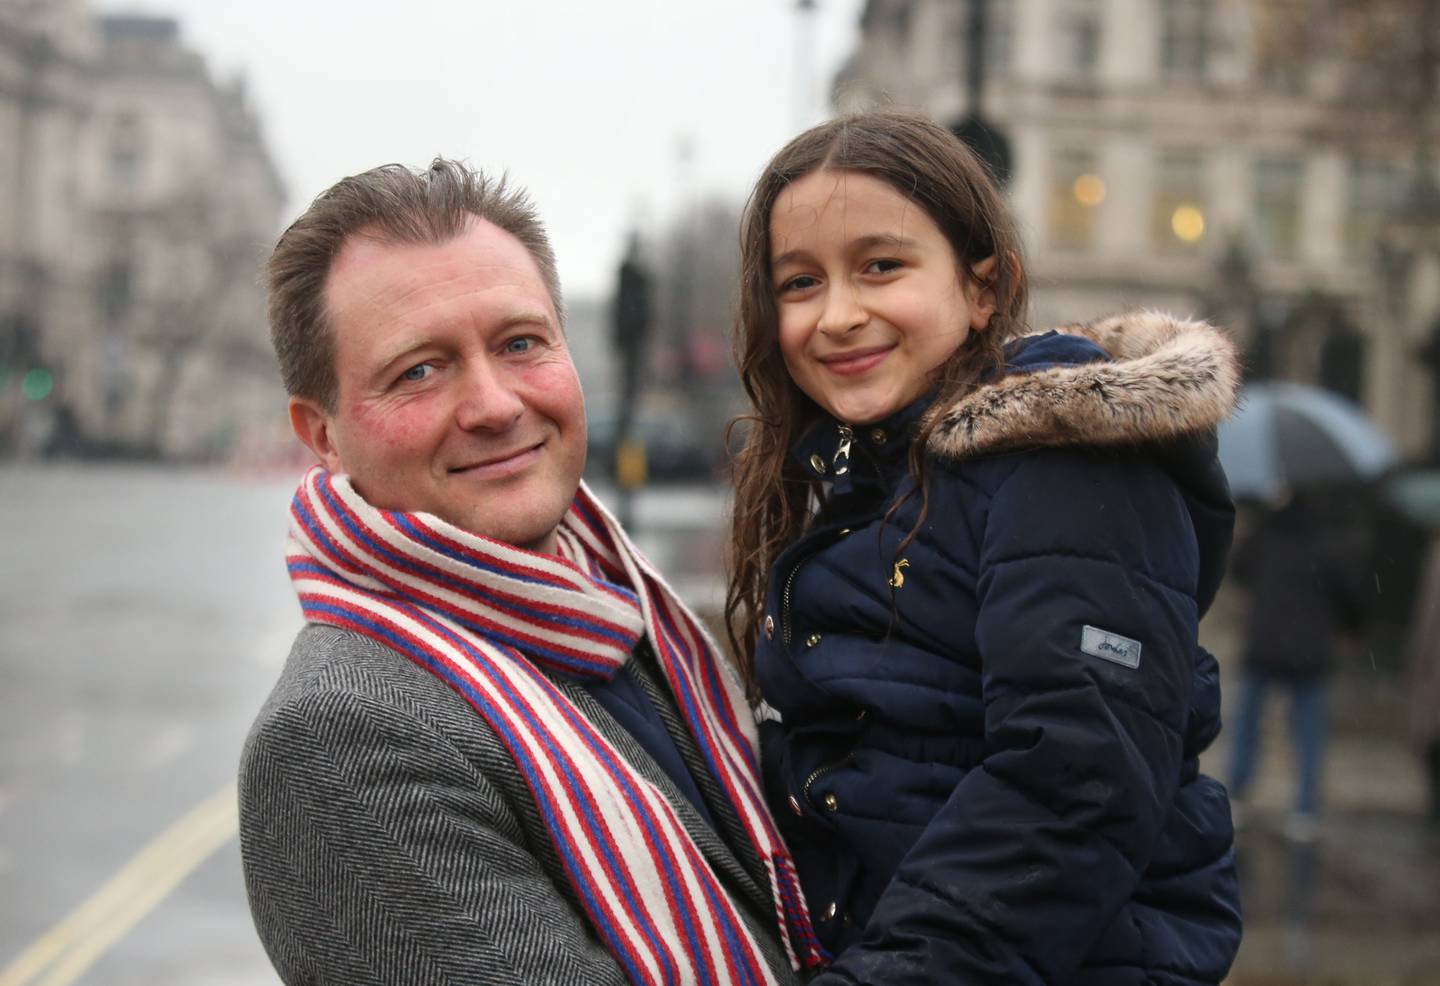 Richard Ratcliffe, with his daughter Gabriella, outside the Houses of Parliament in London on Wednesday, after his wife Nazanin Zaghari-Ratcliffe was freed from detention. PA